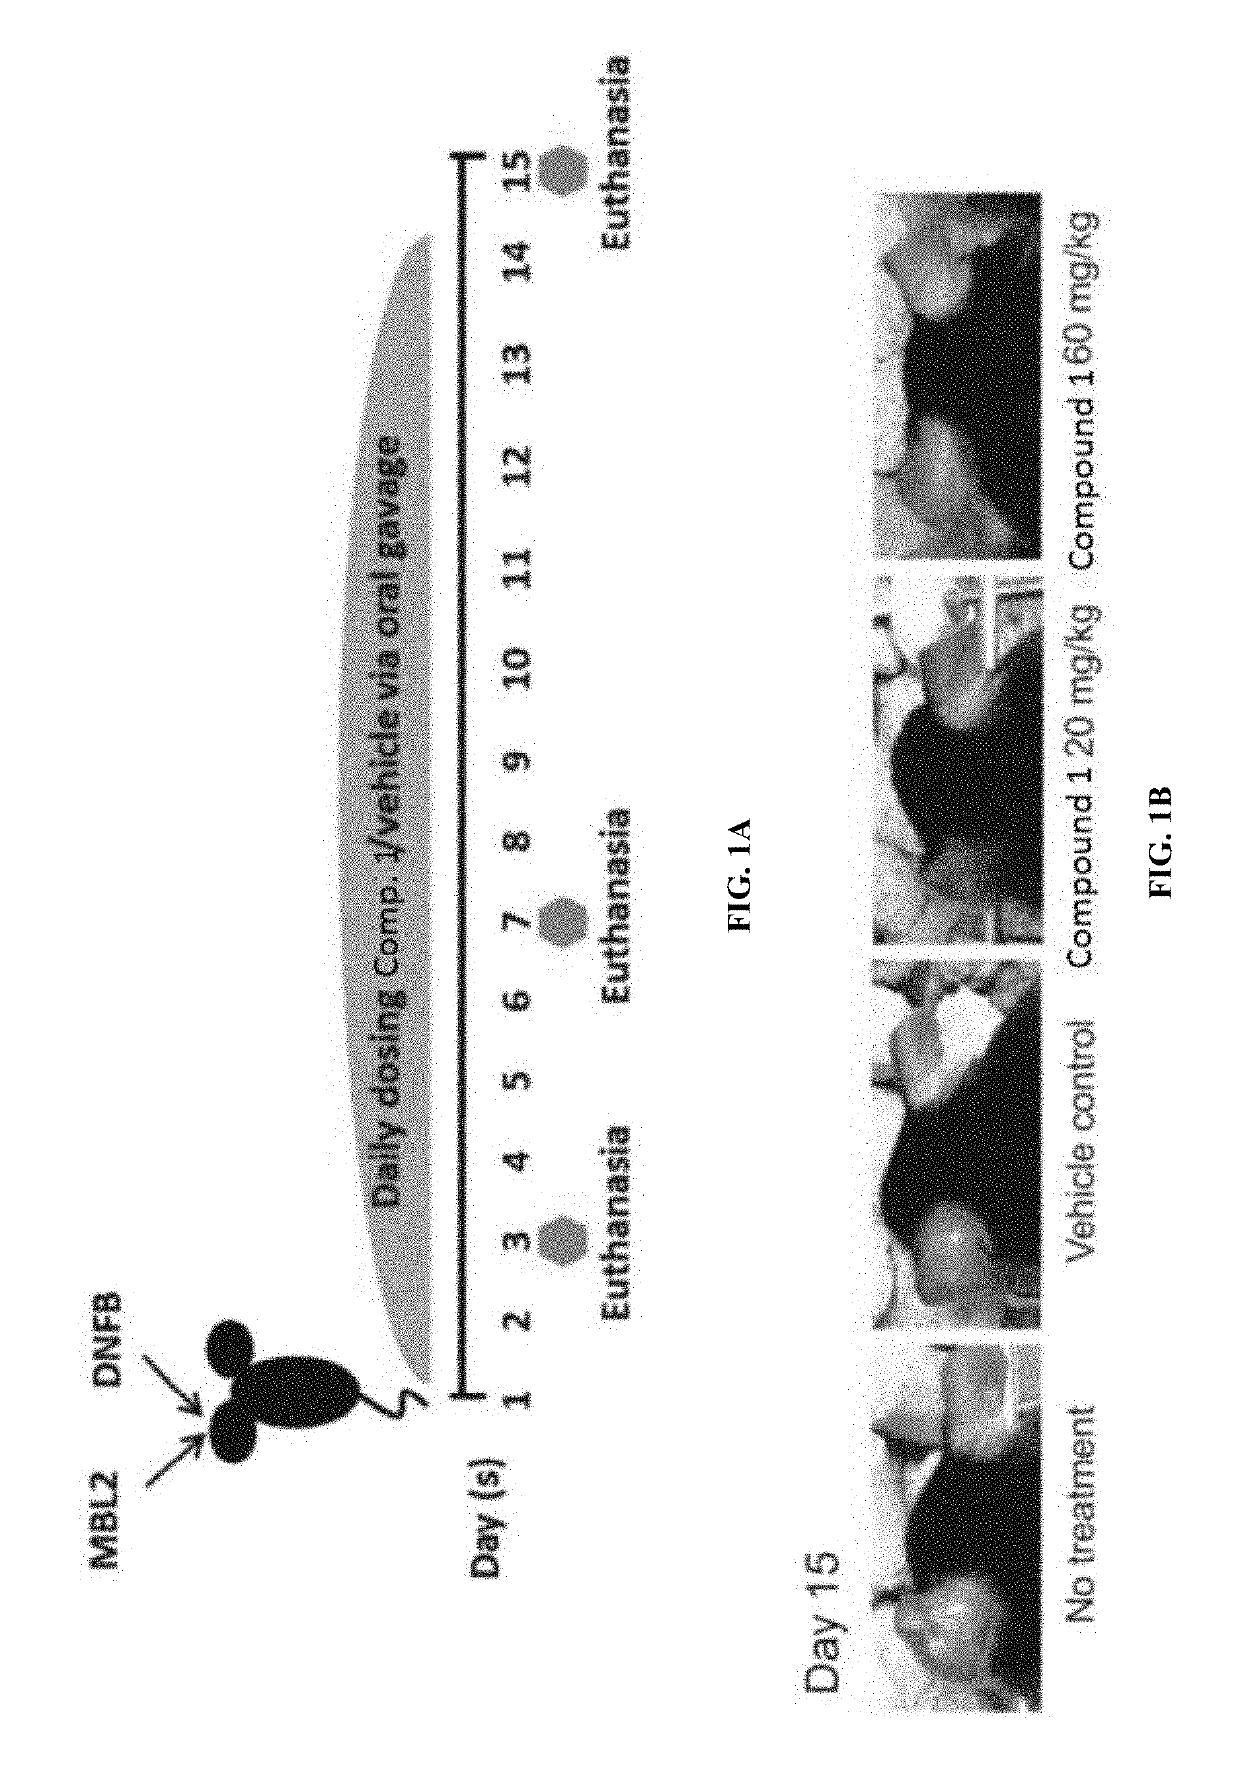 Methods of treating solid tumors with CCR2 antagonists